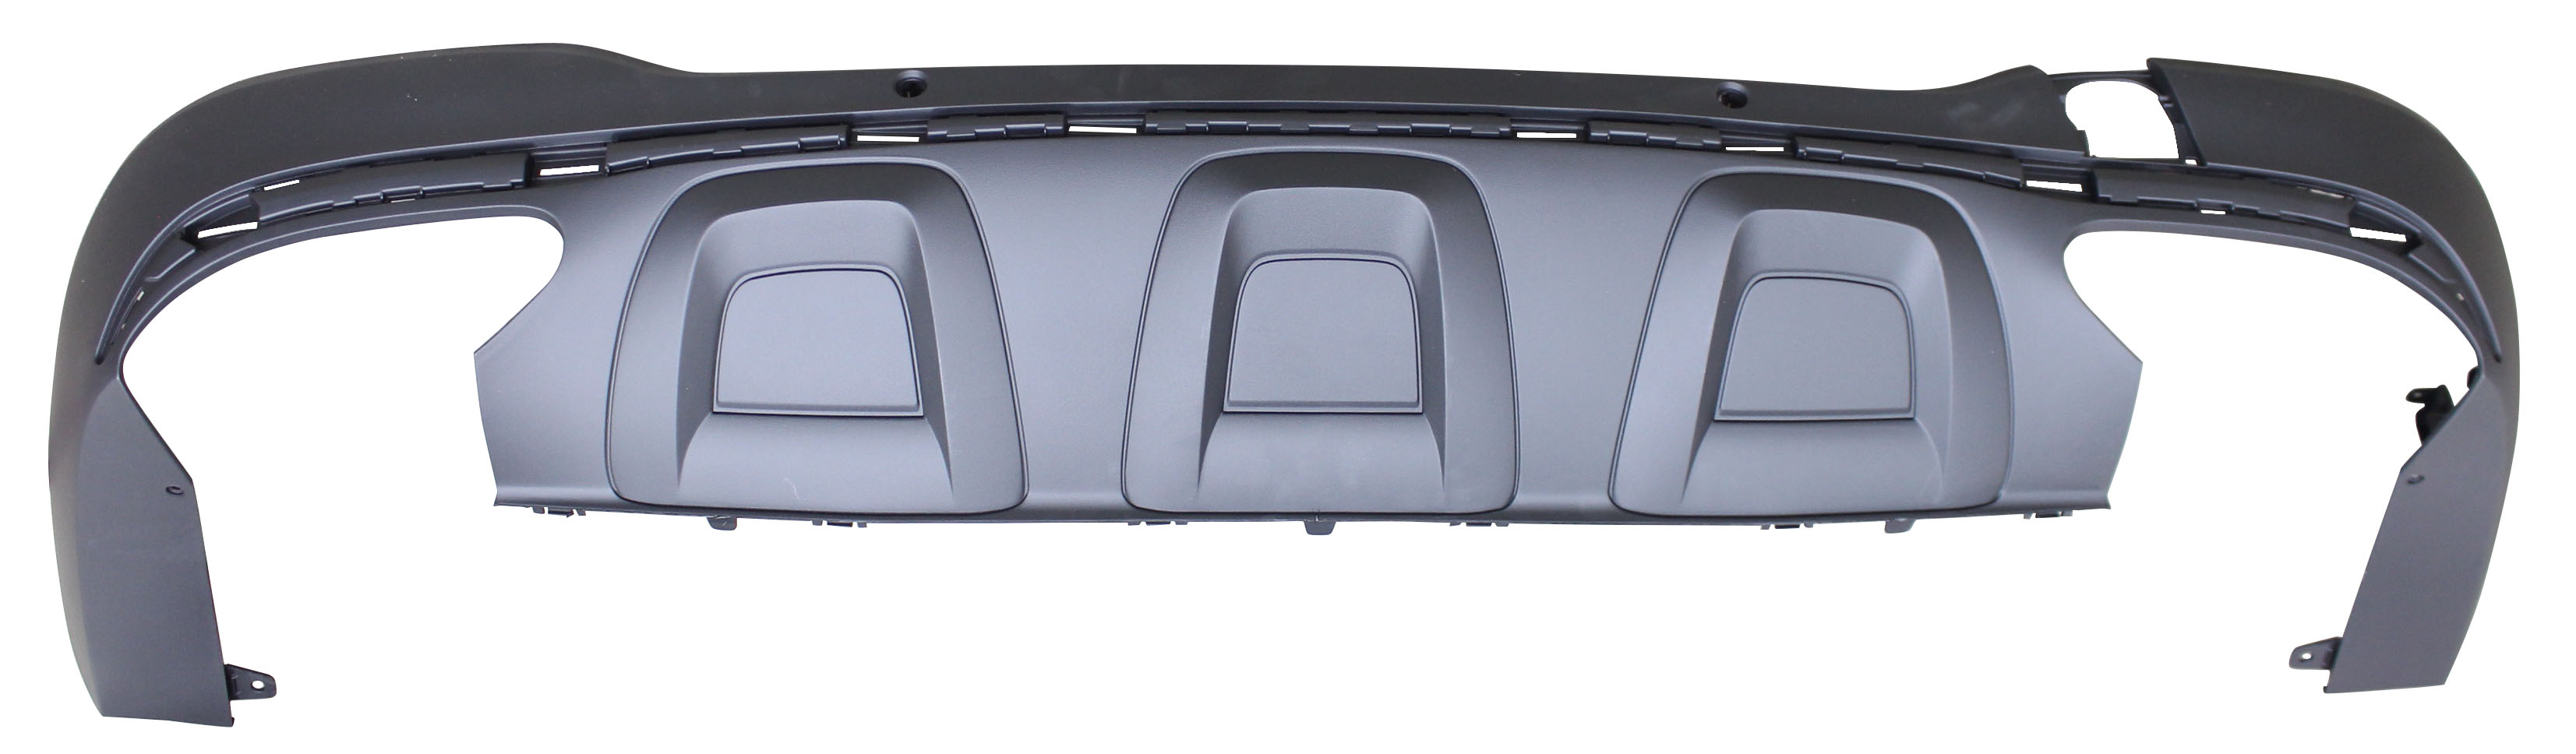 Aftermarket BUMPER COVERS for MERCEDES-BENZ - GLC300, GLC300,16-19,Rear bumper cover lower